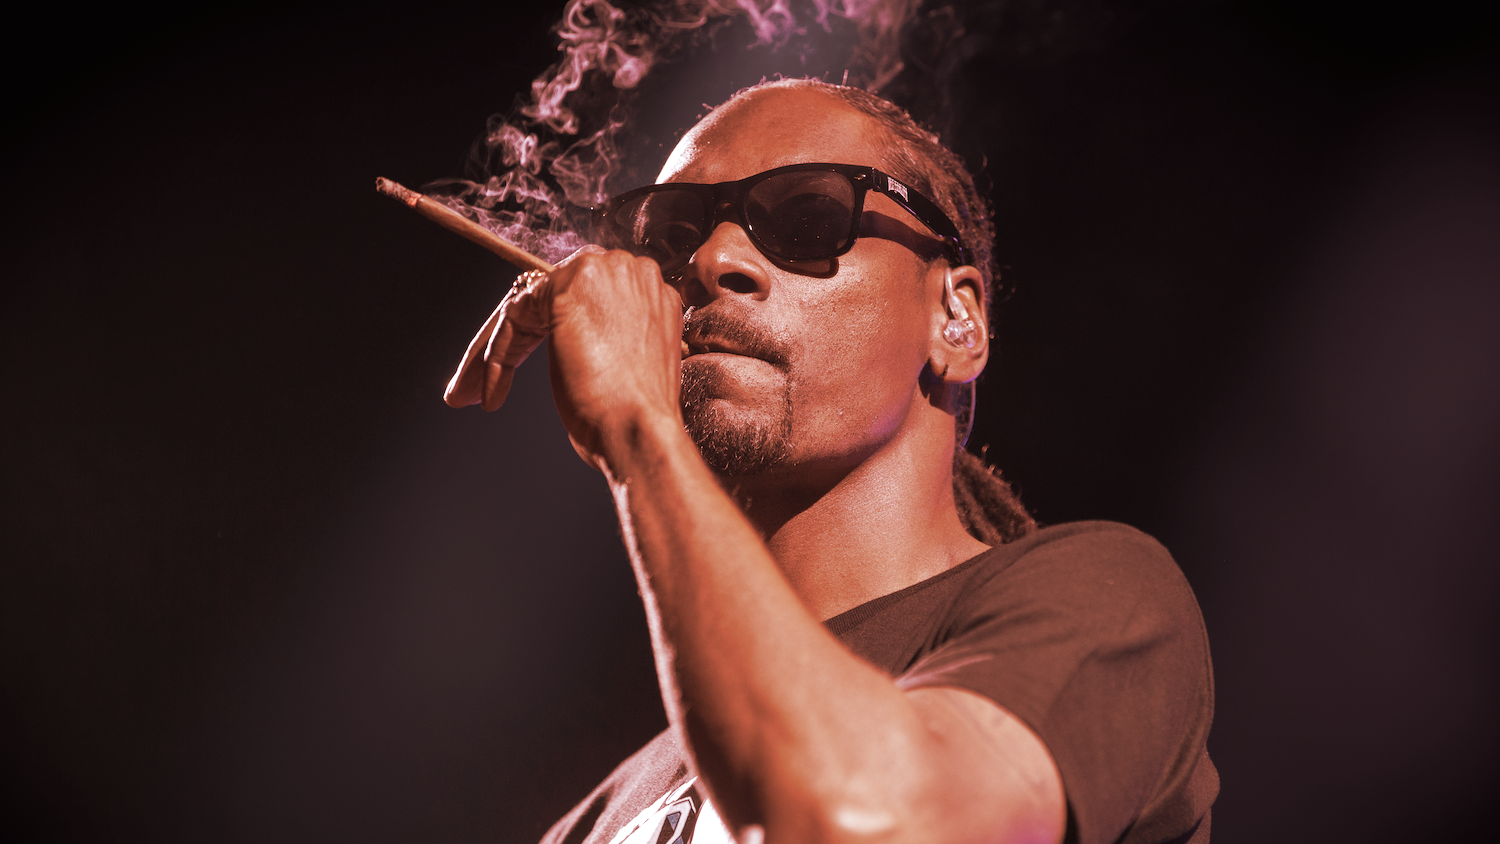 Snoop Dogg Is Selling 1,000 NFT Passes for Private Ethereum Metaverse Party